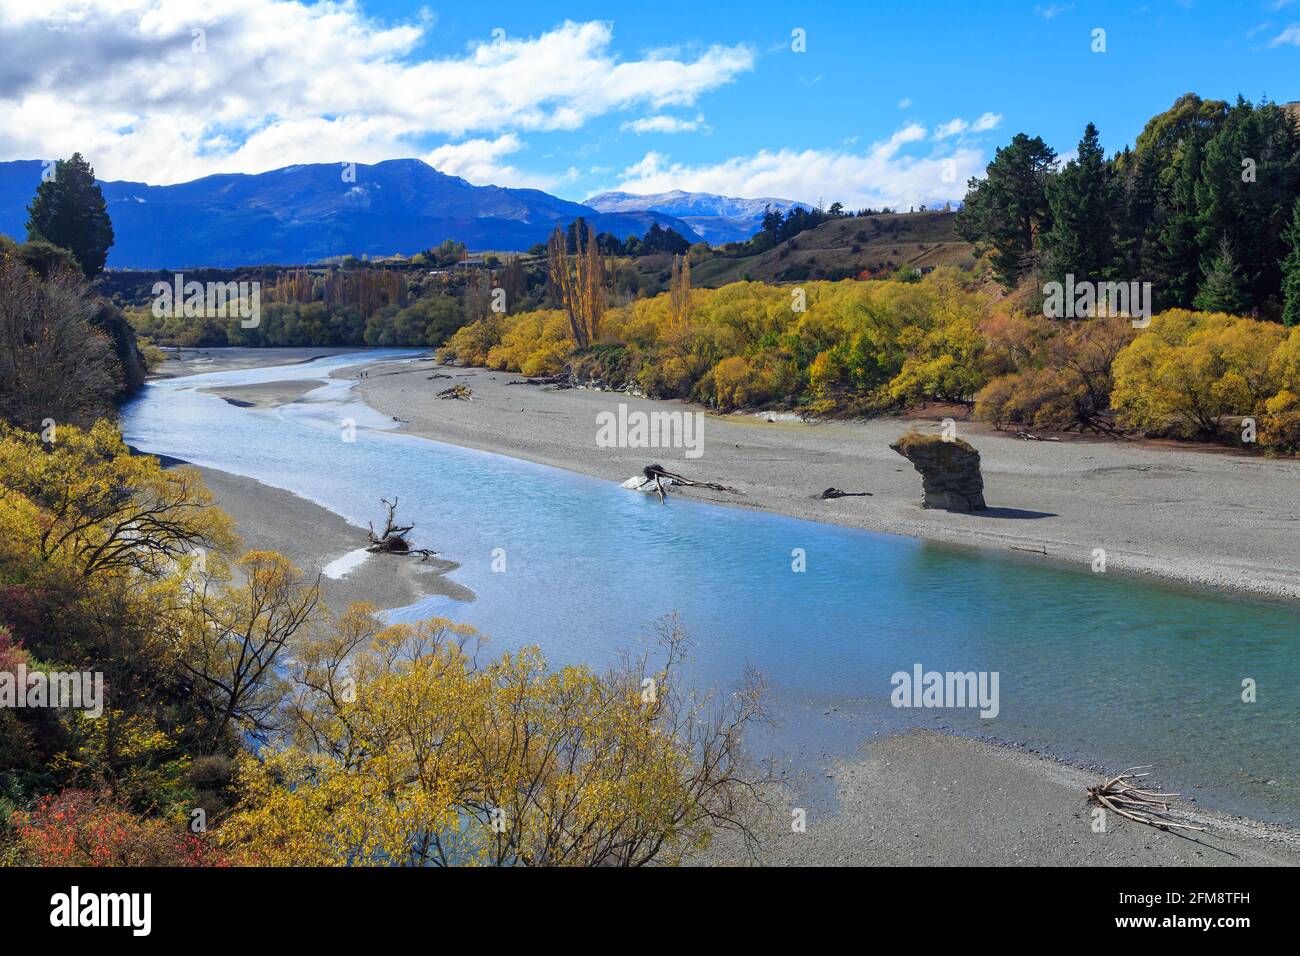 The Shotover River near Queenstown in the South Island of New Zealand. Photographed in autumn, while surrounded by colorful foliage Stock Photo